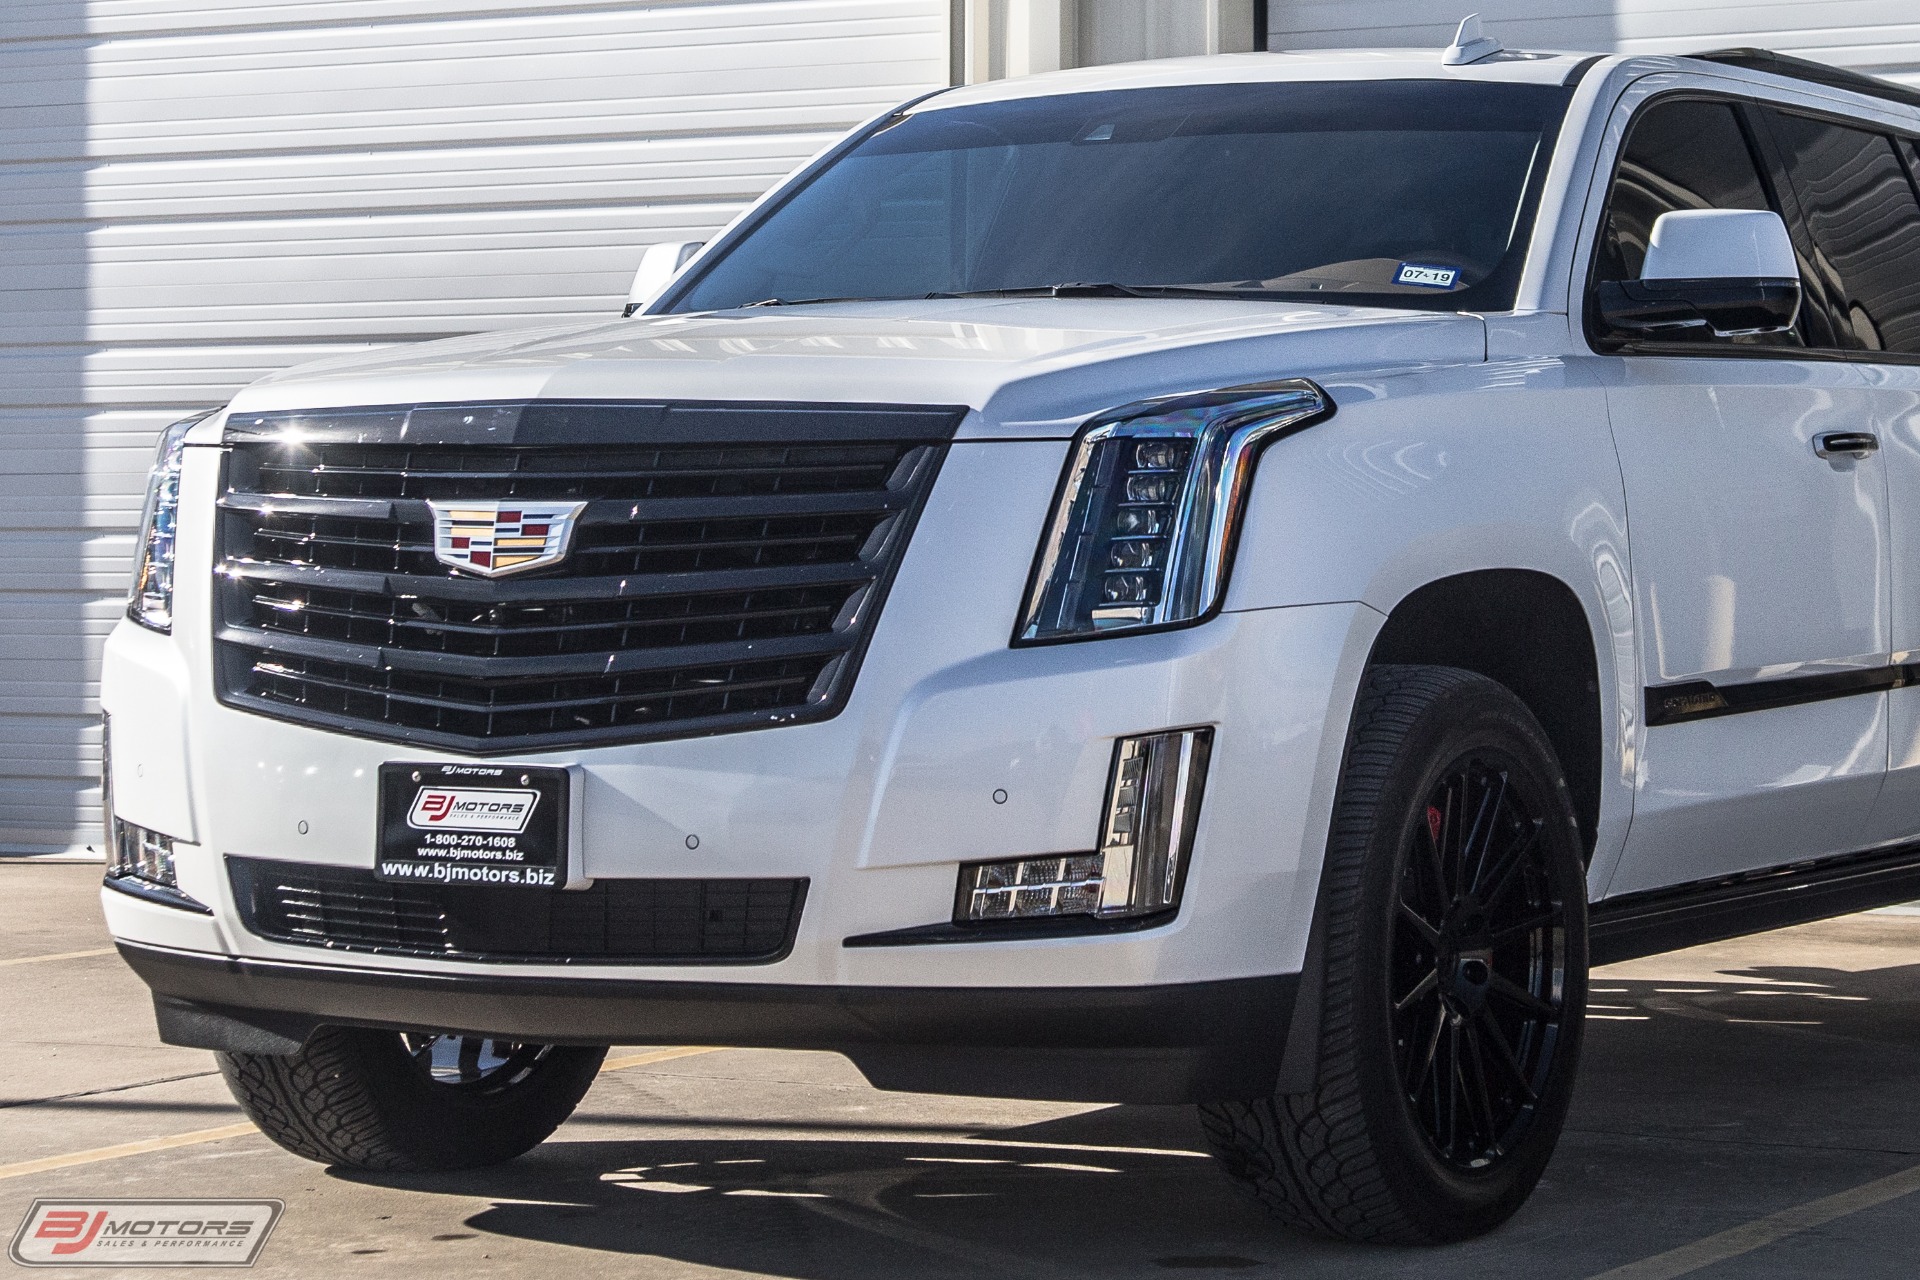 Used-2016-Cadillac-Escalade-ESV-Platinum-Hennessey-Performance-HPE650-Package